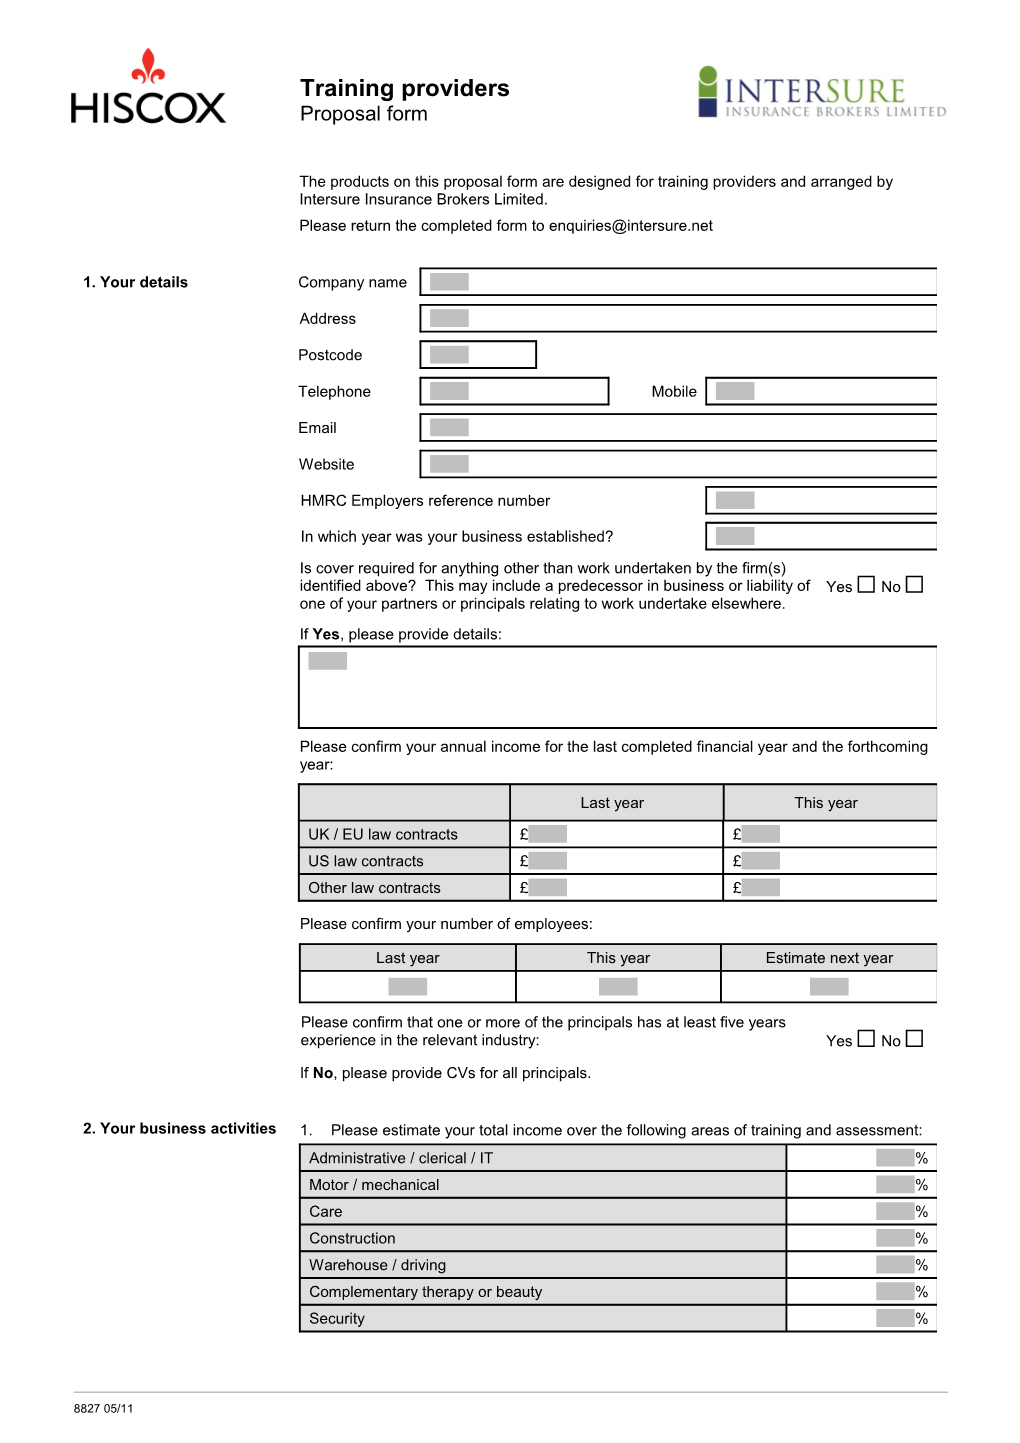 Training Providers Proposal Form